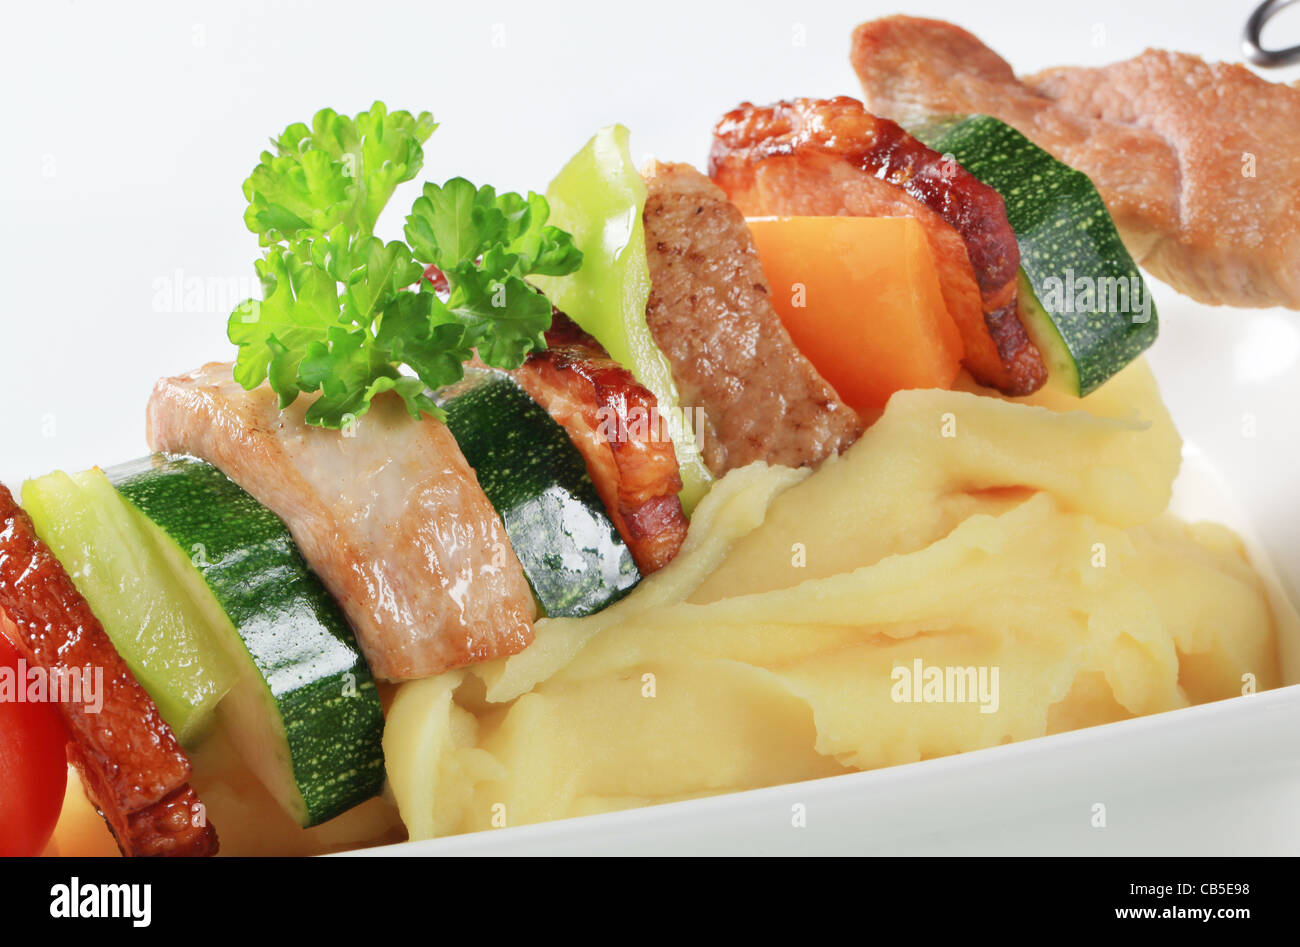 Pork and vegetable skewer with mashed potato Stock Photo